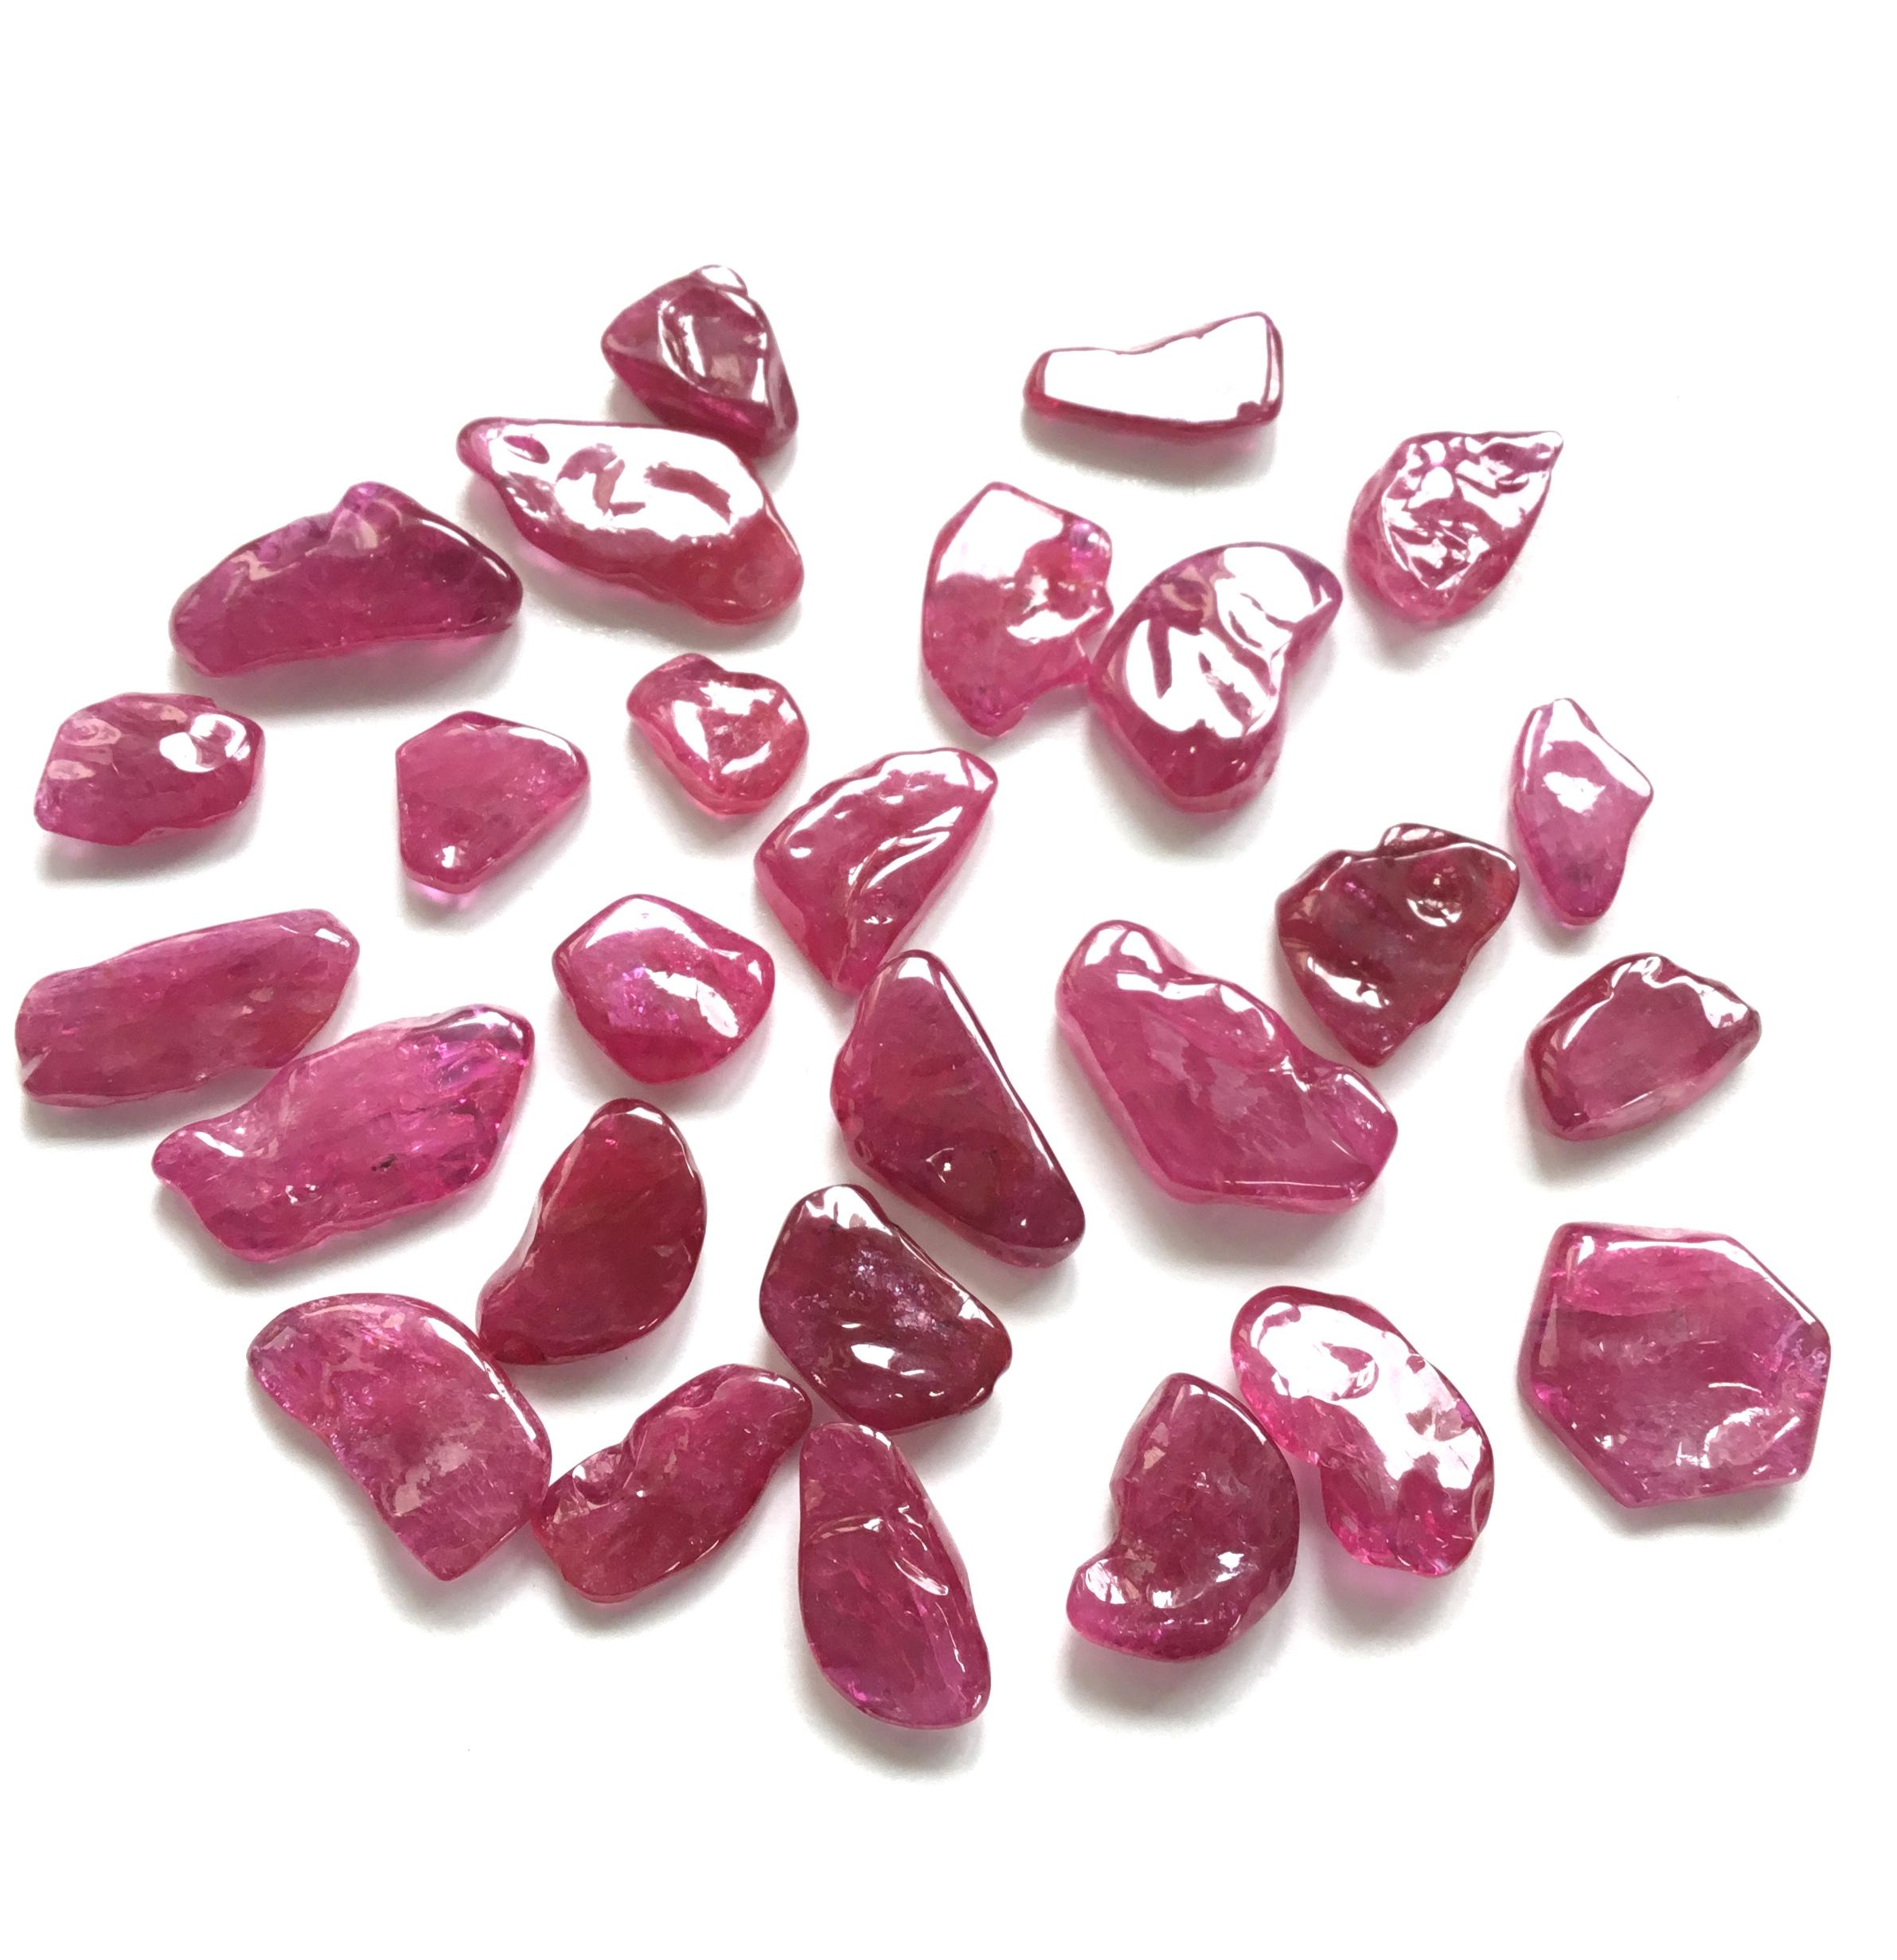 Tumbled Top Quality Mozambique Ruby Natural Plain Tumble Gemstone For Jewelry Making  For Sale